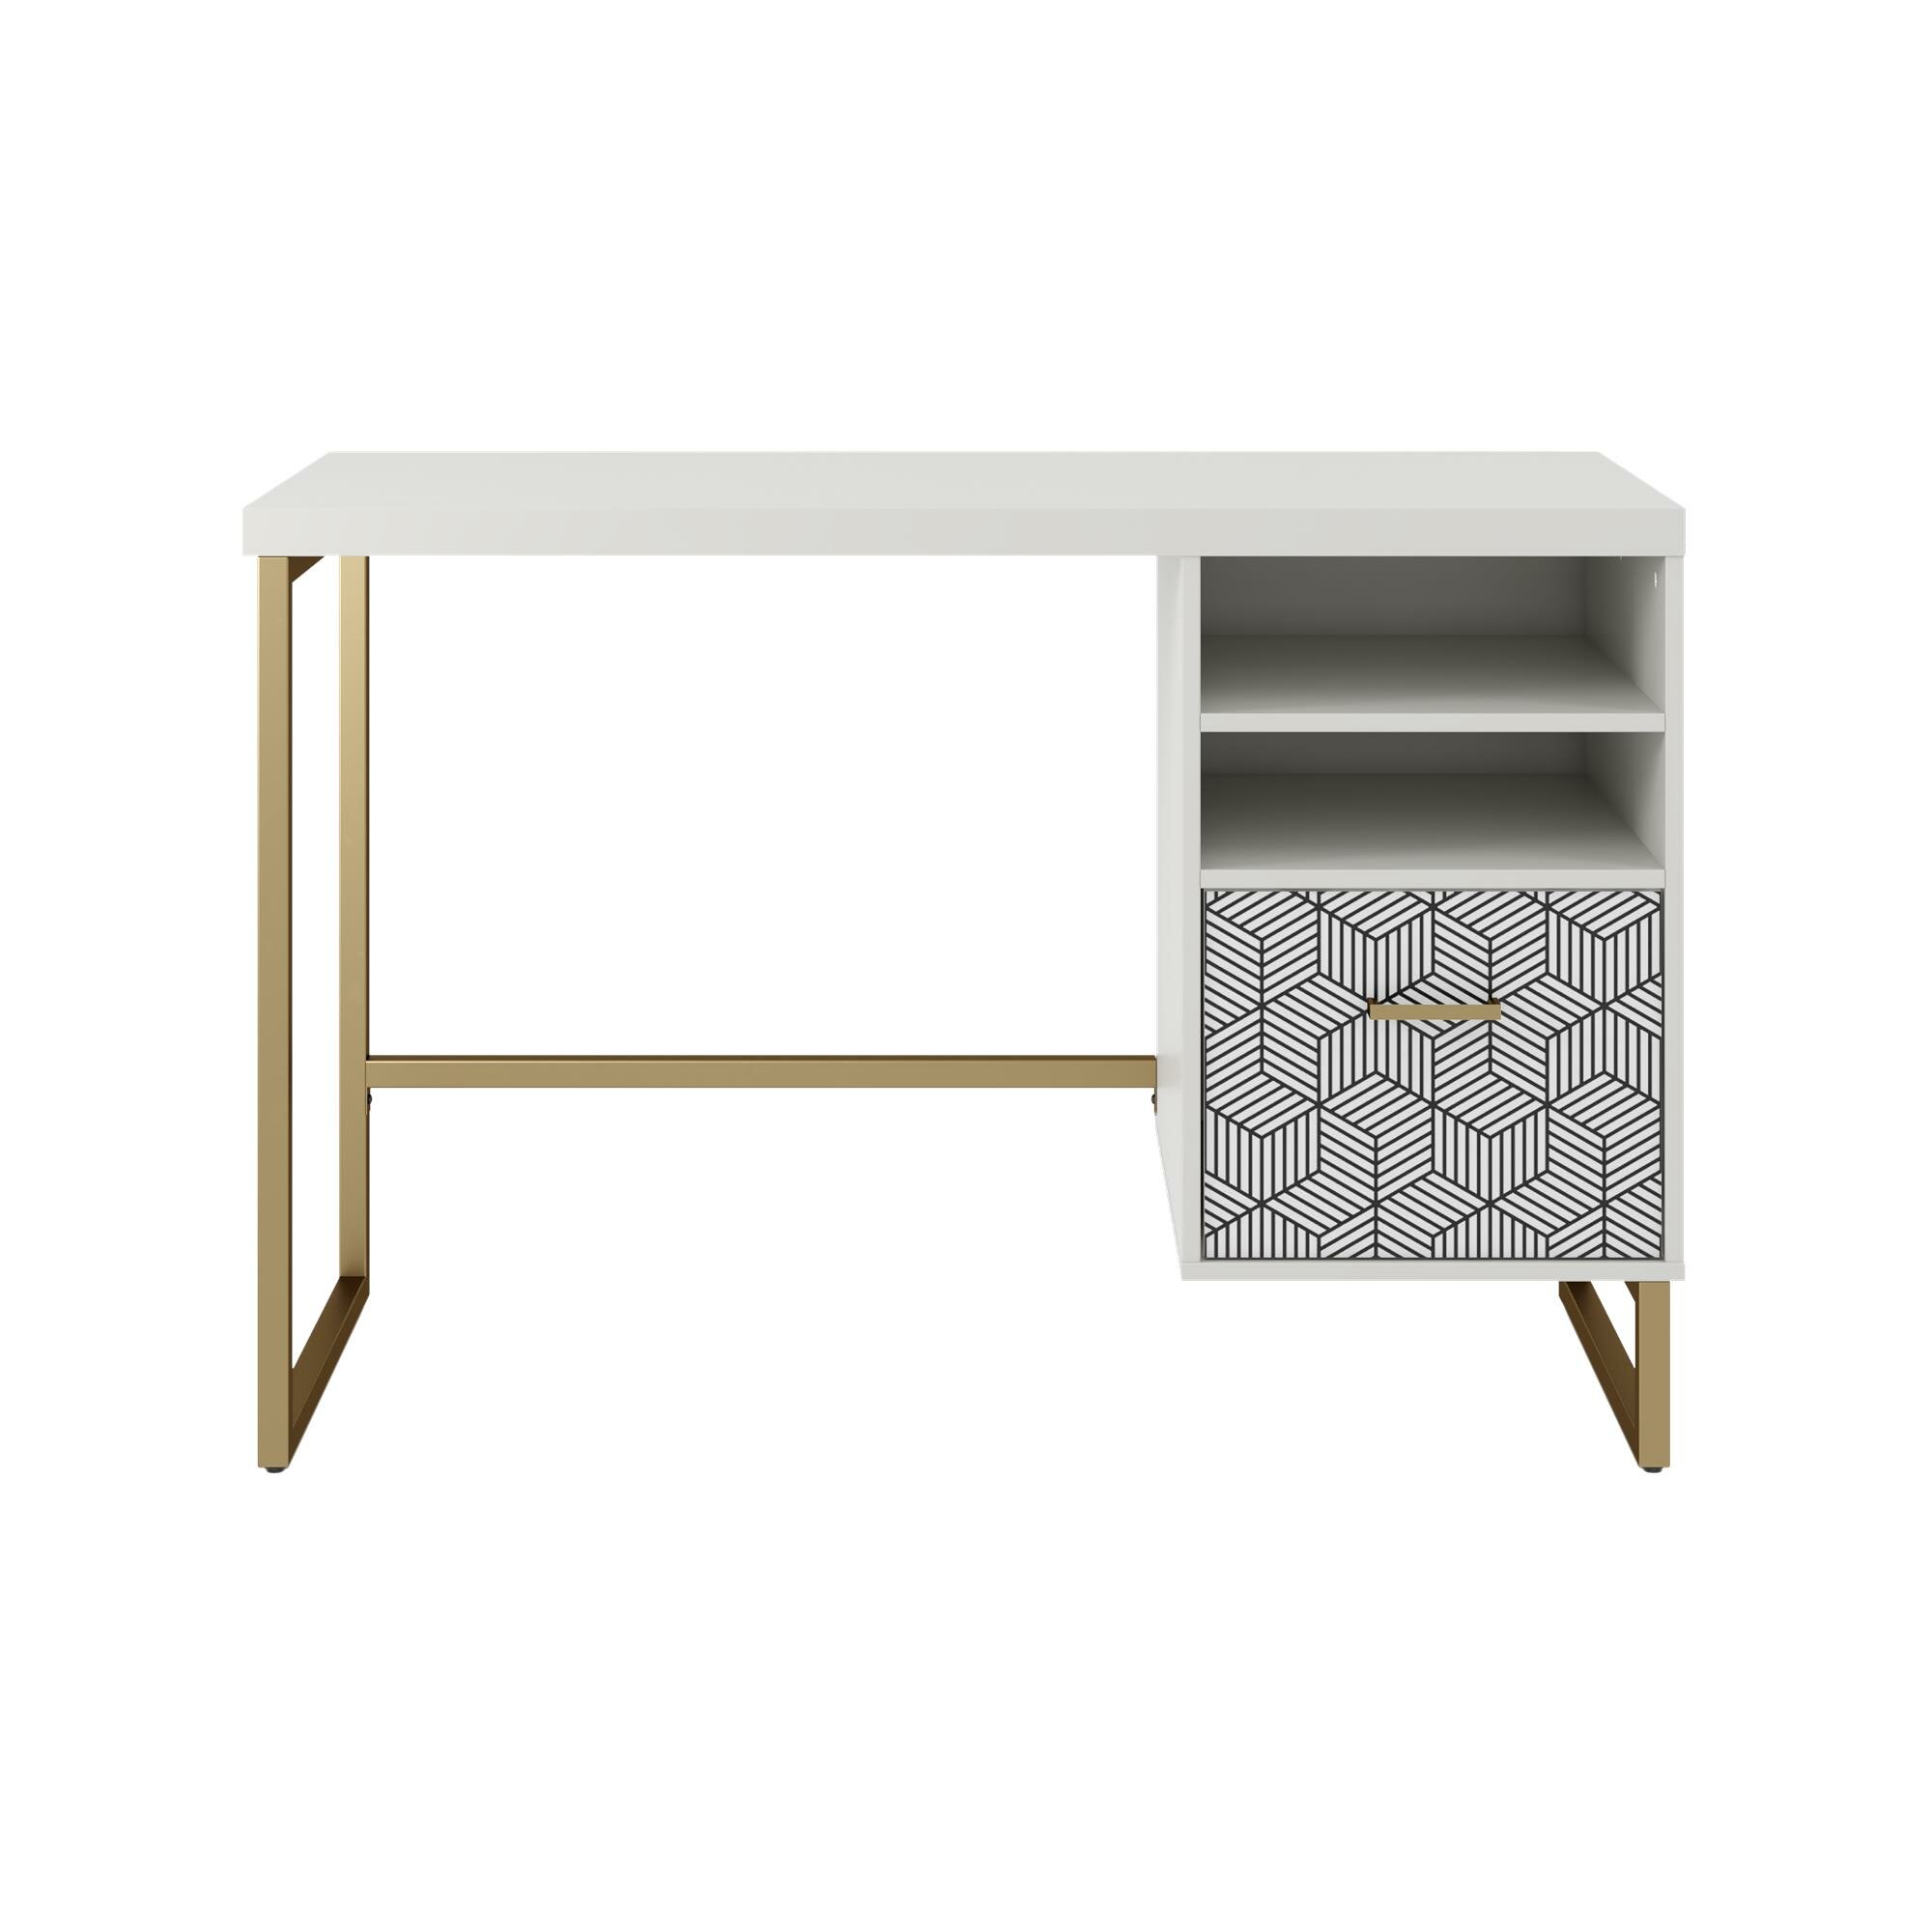 13 Accessories For Your Office Desk, by Ella James